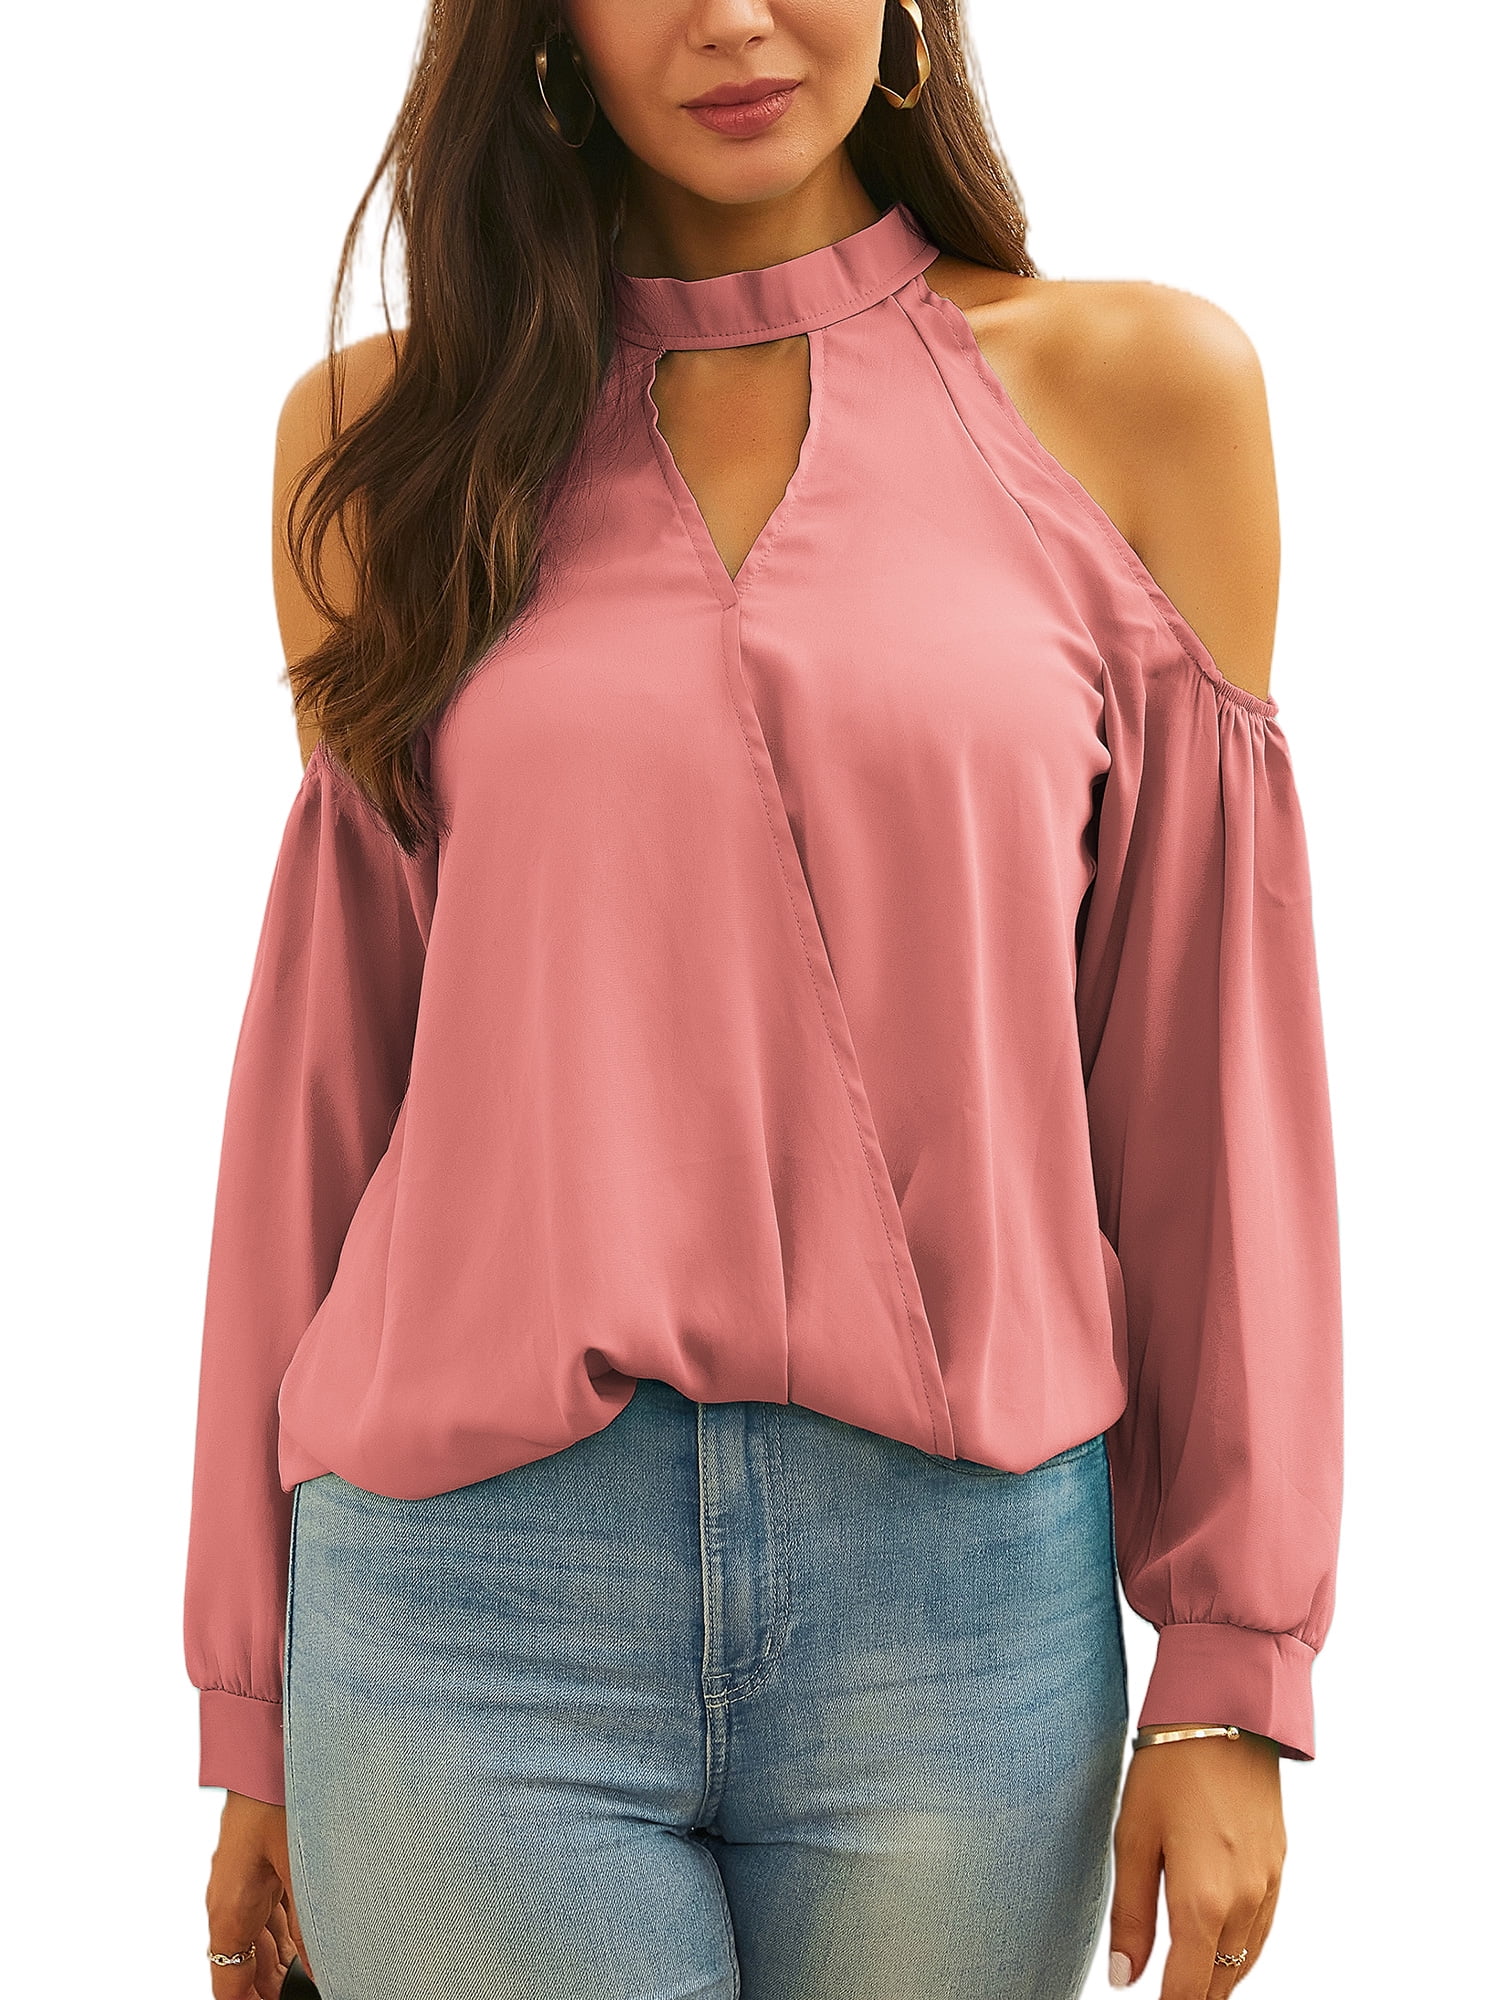 Long Sleeve Hollow Out Shirt for Women Sexy Cold Shoulder Tops Solid Color Choker Neck - Walmart.com